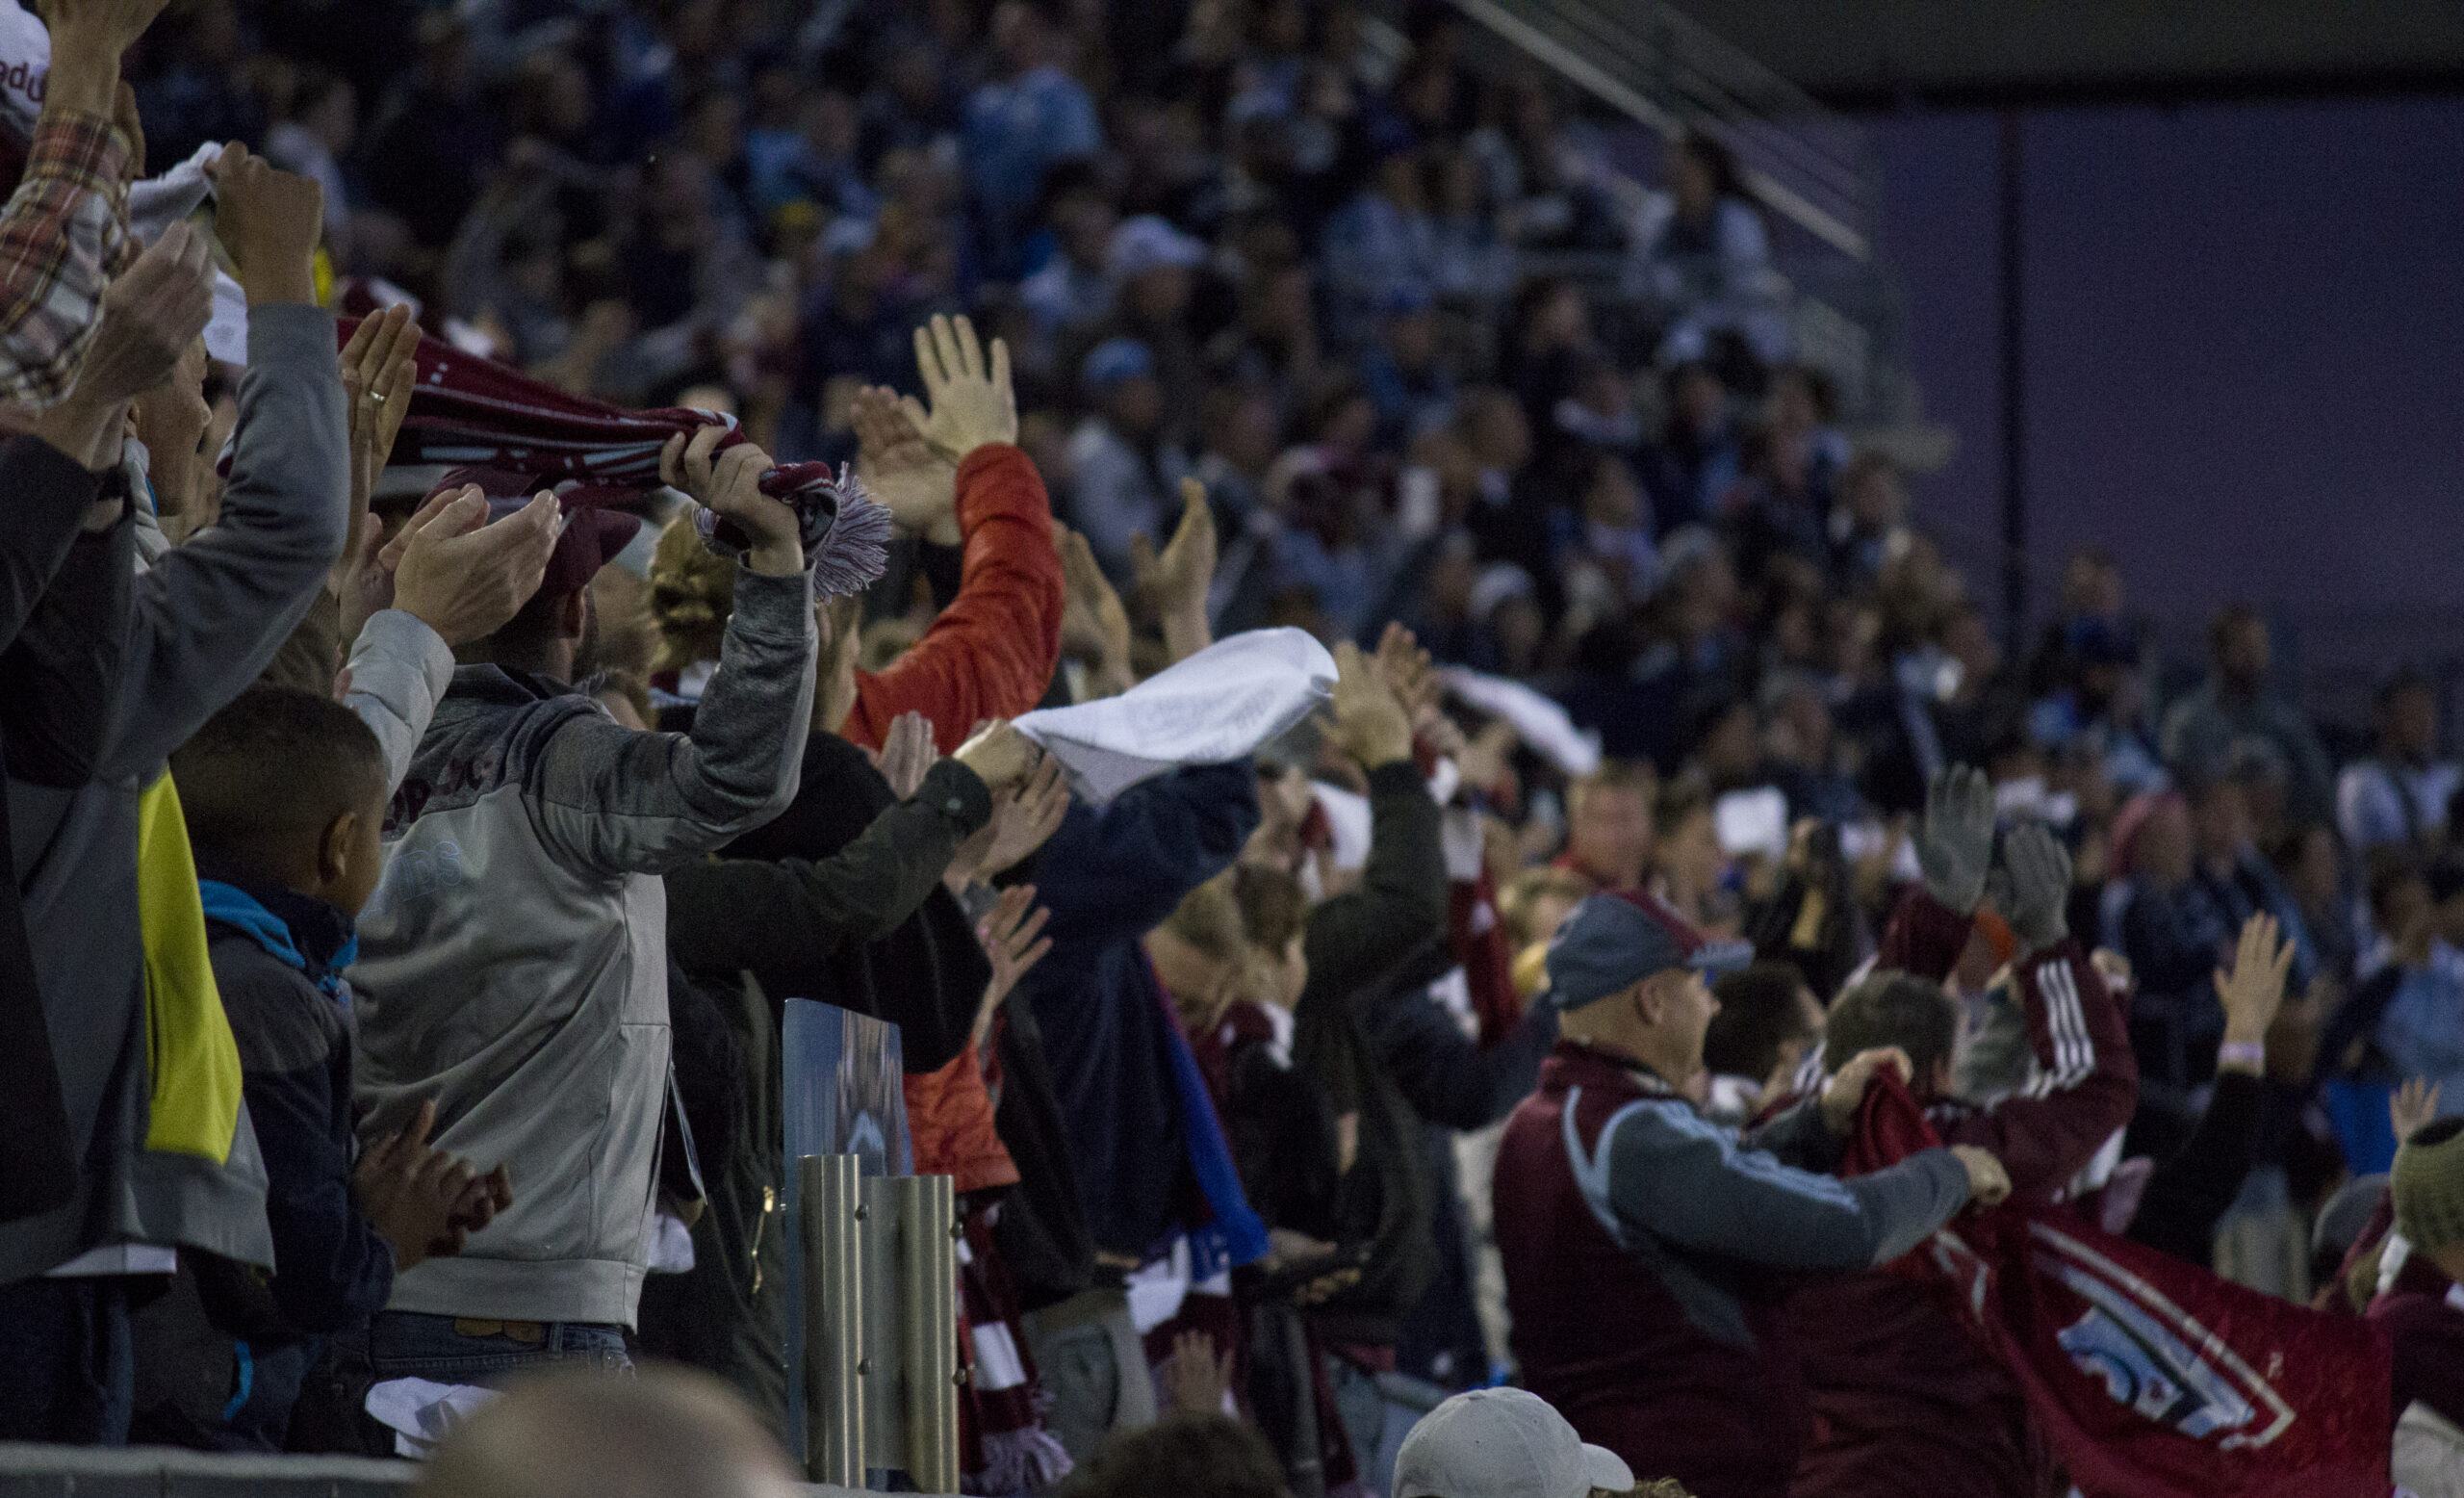 Colorado Rapids fans celebrate after the first goal of the game. Photo by: Matthew McGuire on 03/24/18 at Dick's Sporting Goods Park